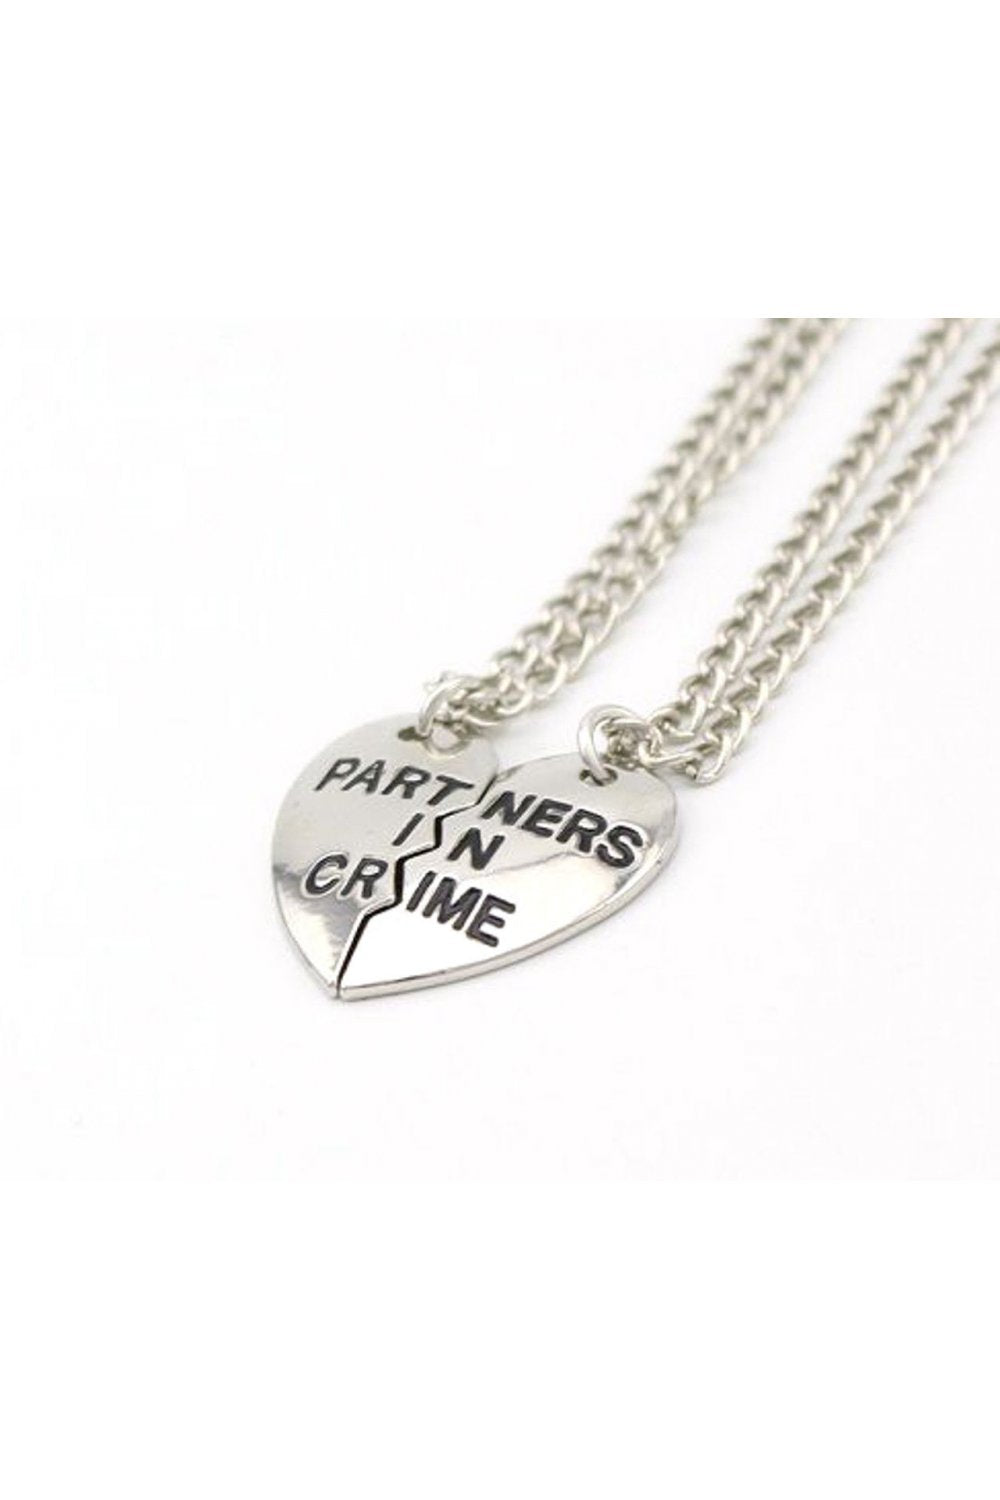 Partners In Crime Silver Friendship Necklaces